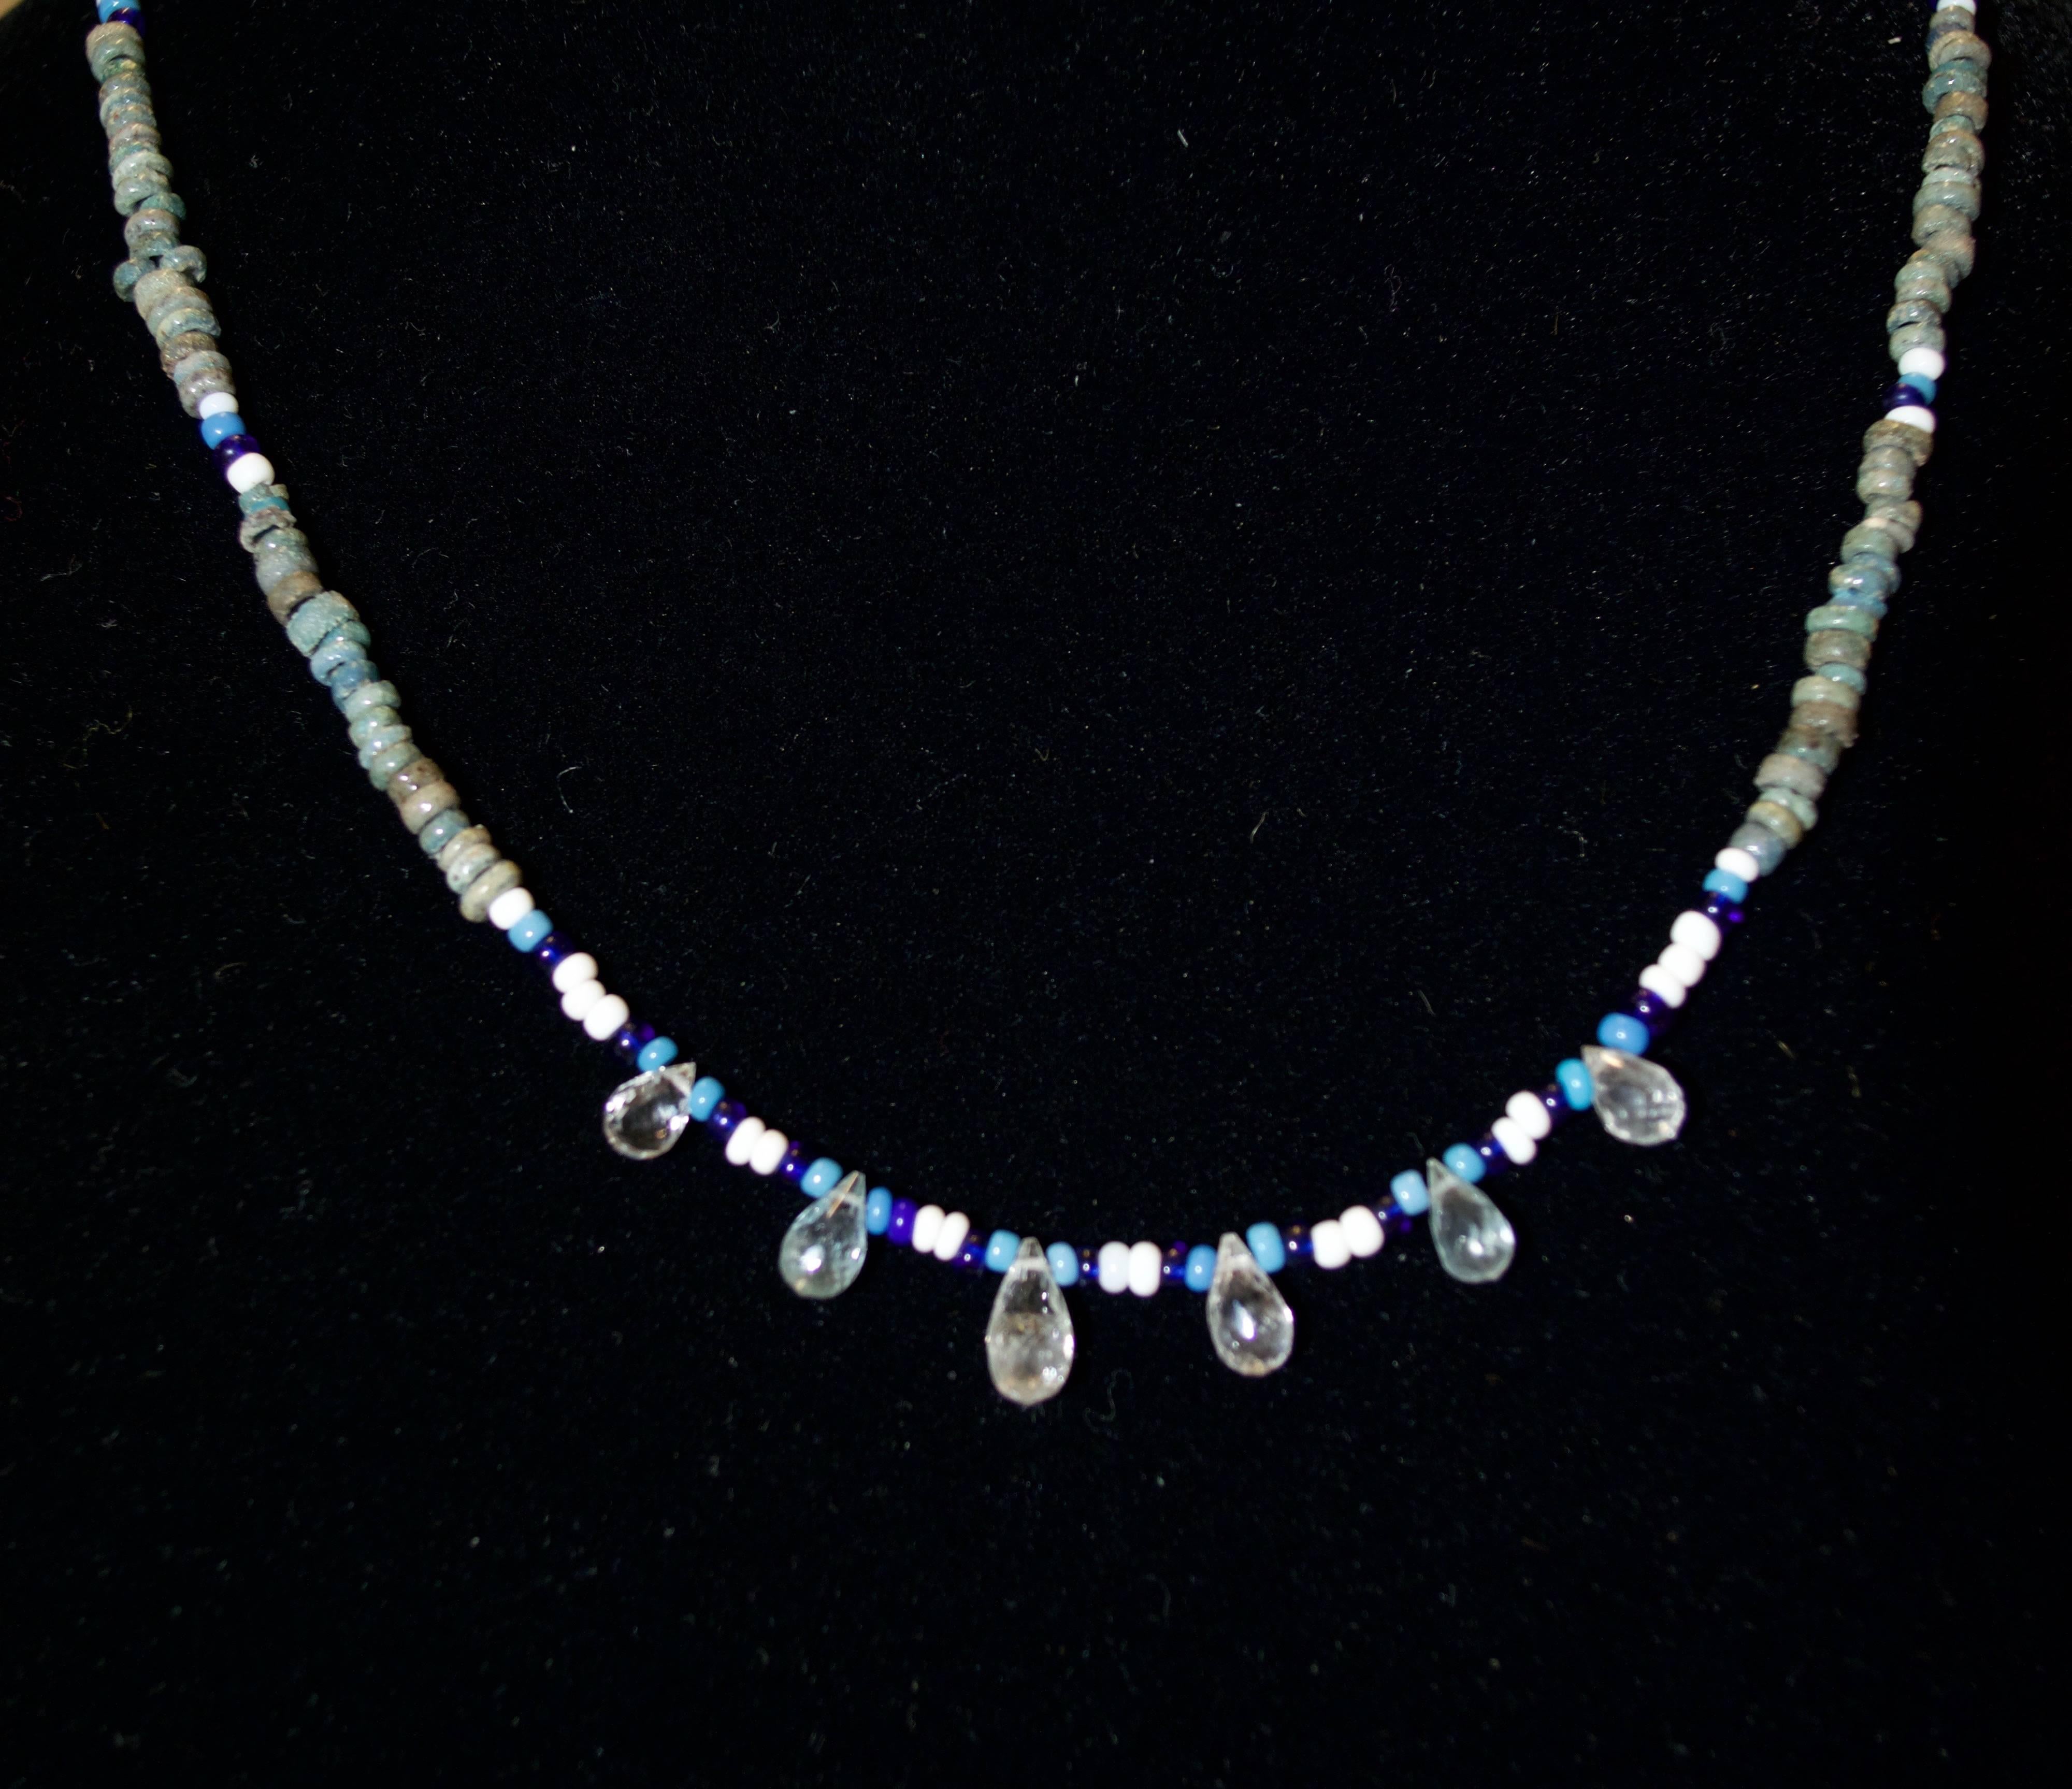 Original Egyptian Faience beads, Ca. 712-343 BC (only the green ones)  restrung with 6 contemporary citrine Briolettes interlaced with sky blue, white and dark blue beads. Modern new string and clasp.

This piece comes from our 